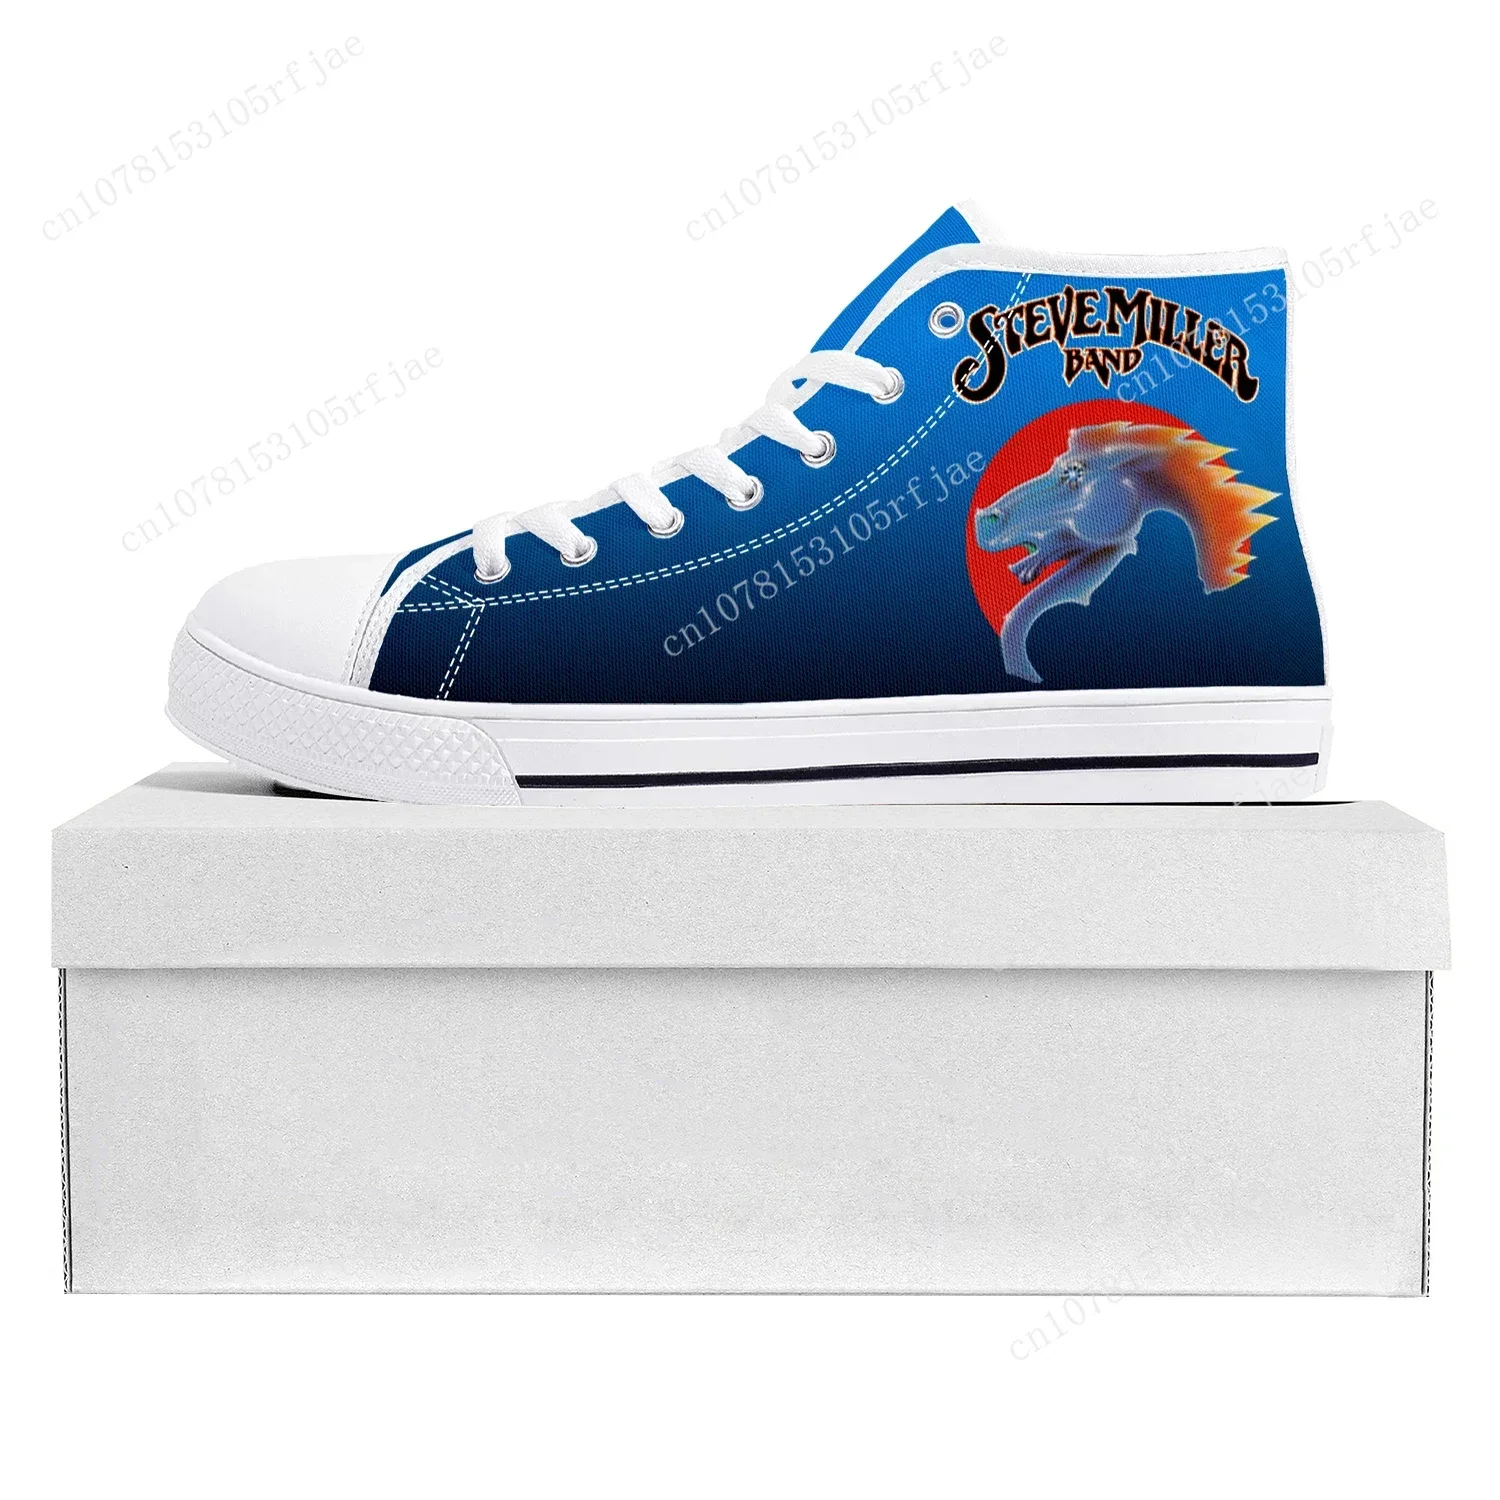 

Steve Miller Rock Band High Top High Quality Sneakers Mens Womens Teenager Canvas Sneaker Casual Couple Shoes Custom Shoe White